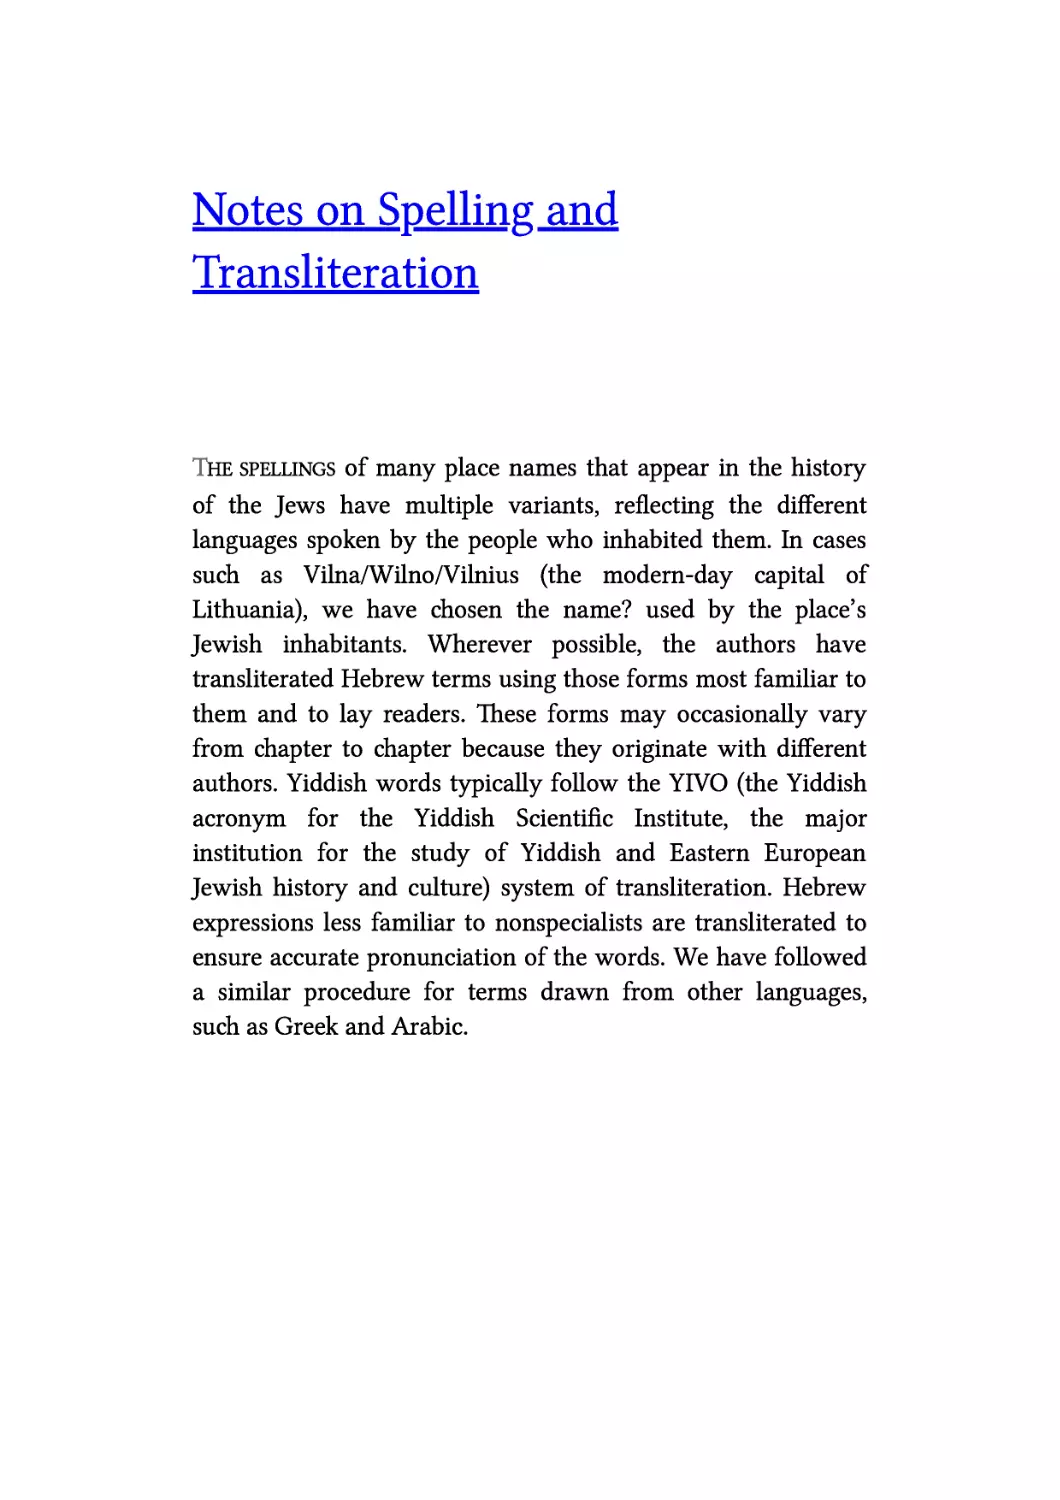 Notes on Spelling and Transliteration